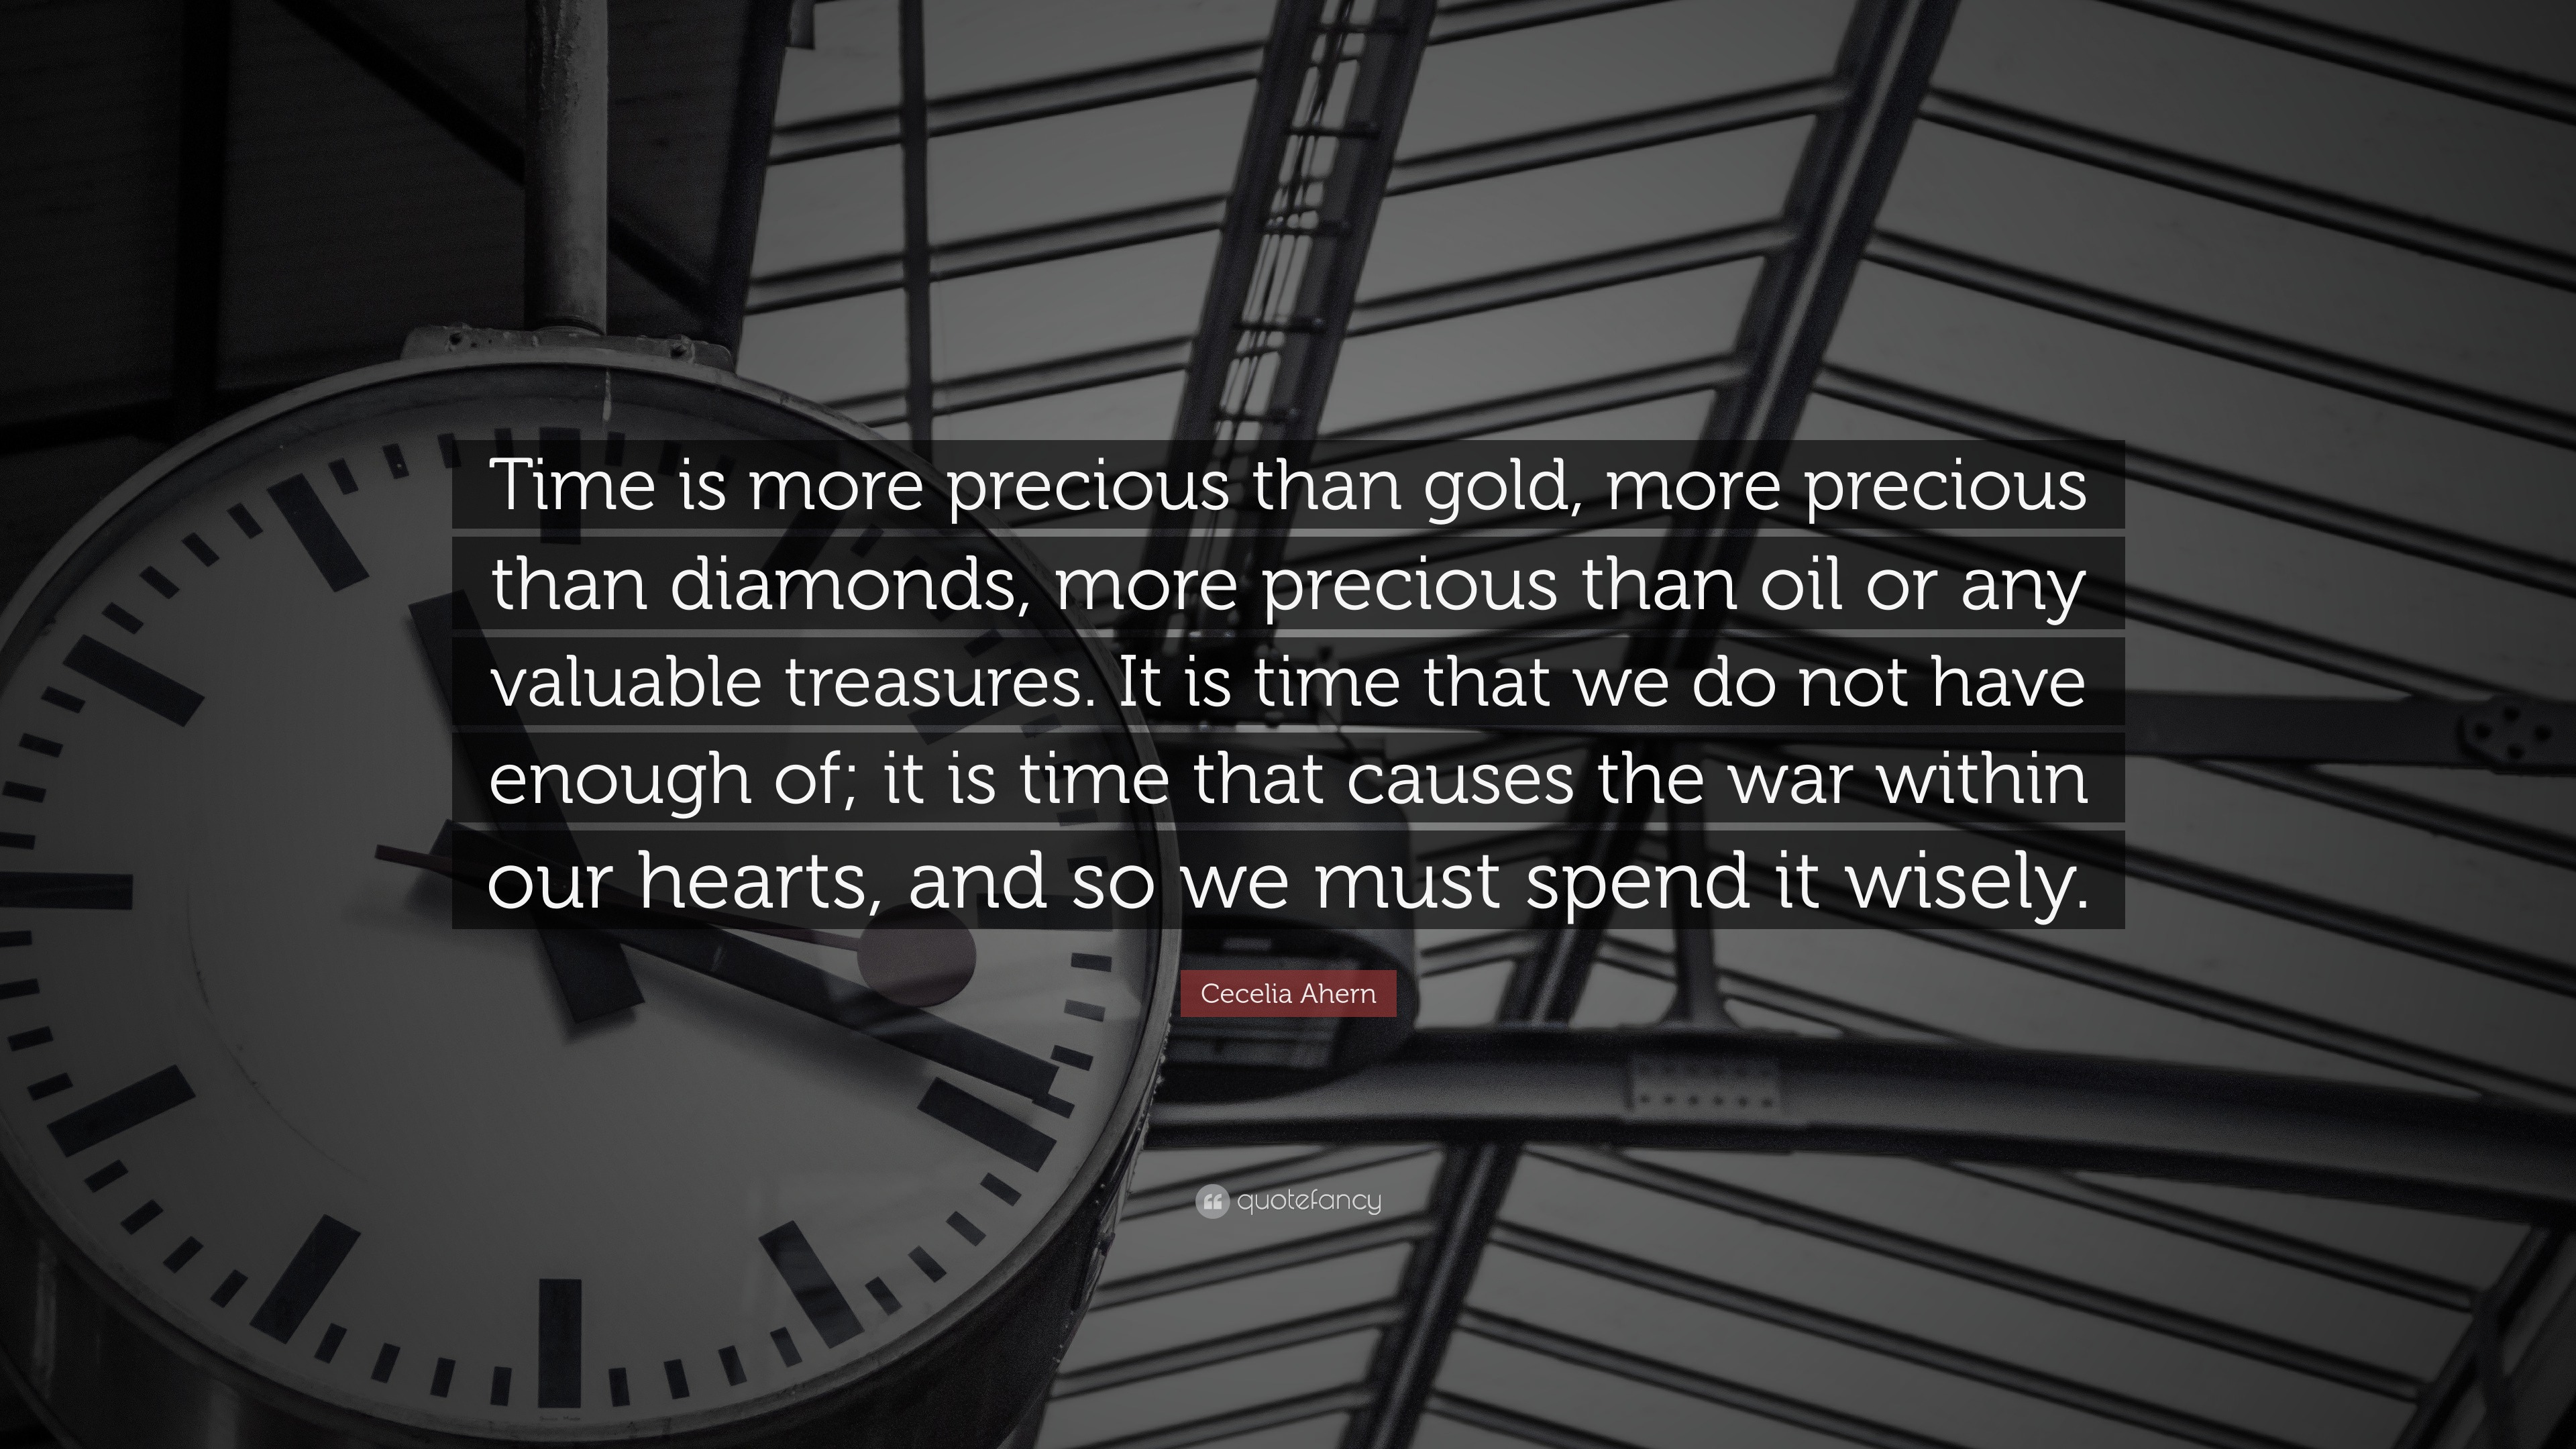 It is time that we do not have enough of... 